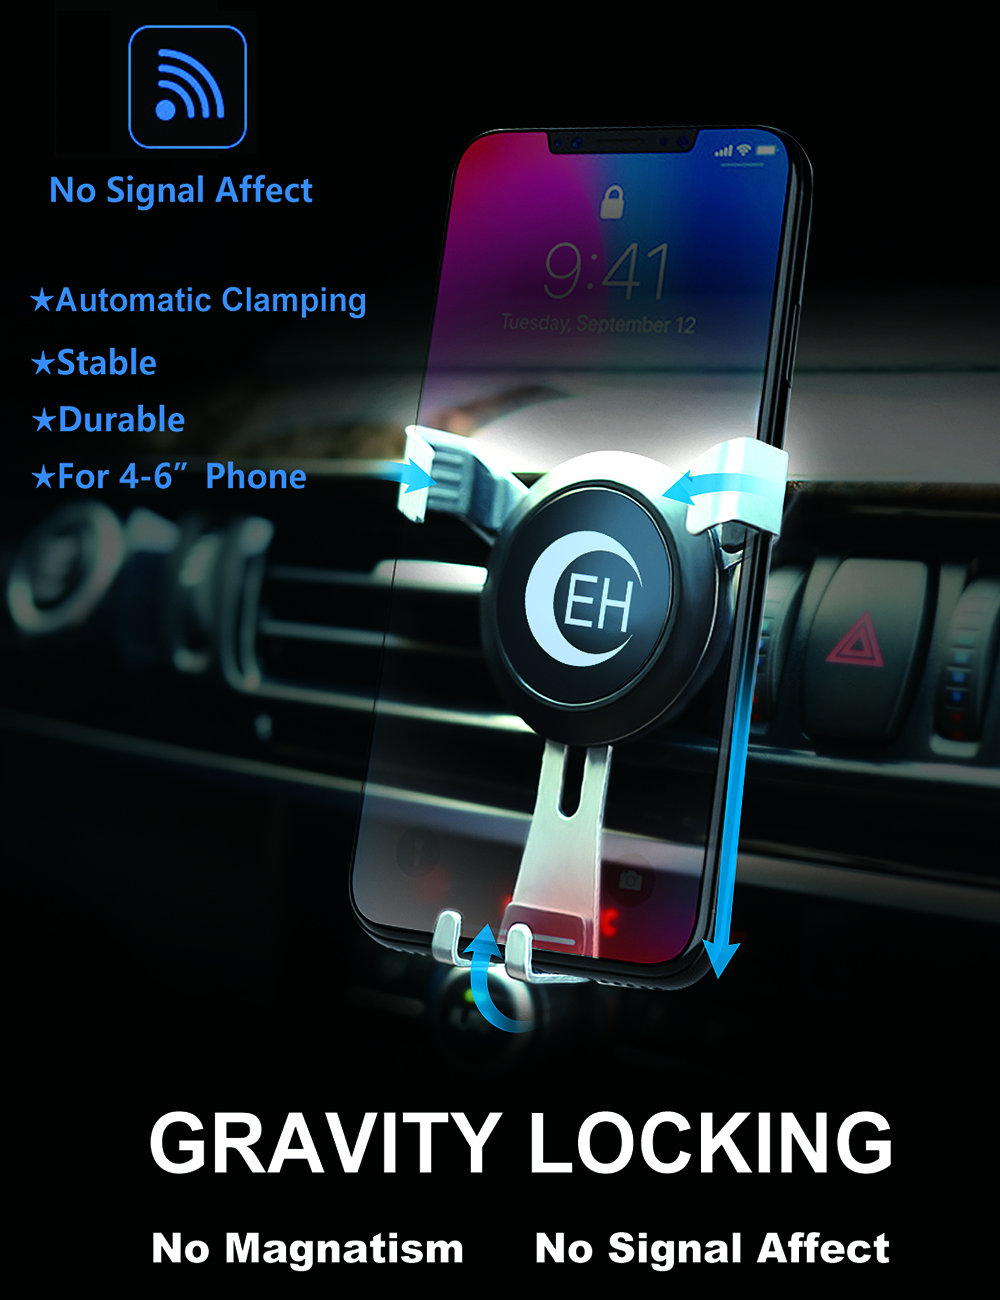 Universal Air Vent Car Phone Mount Cradle Three Side Grips Phone Holder Gravity Sensoring One-Handed Performance Compatible with iPhone XR XS XS MAX X 8 8 Plus 7 7 Plus 6s 6 Plus 6 Samsung Galaxy Google Pixel HTC LG Huawei Xiaomi